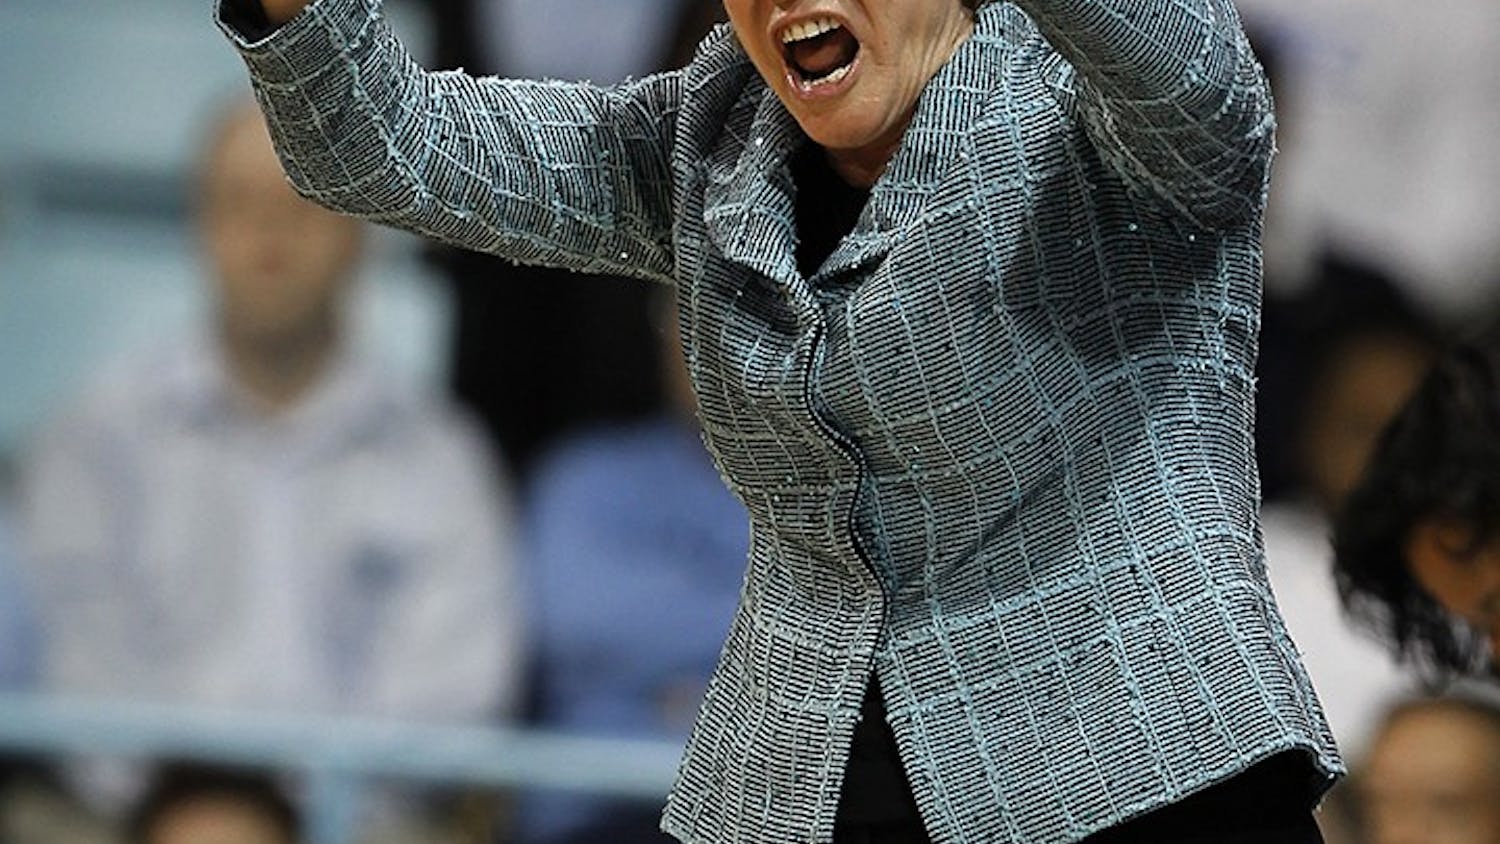 North Carolina head coach Sylvia Hatchell screams at her team in the closing minute against Duke at Carmichael Arena in Chapel Hill, North Carolina, Sunday, February 26, 2012. Duke defeated UNC, 69-63. (Chuck Liddy/Raleigh News &amp; Observer/MCT)